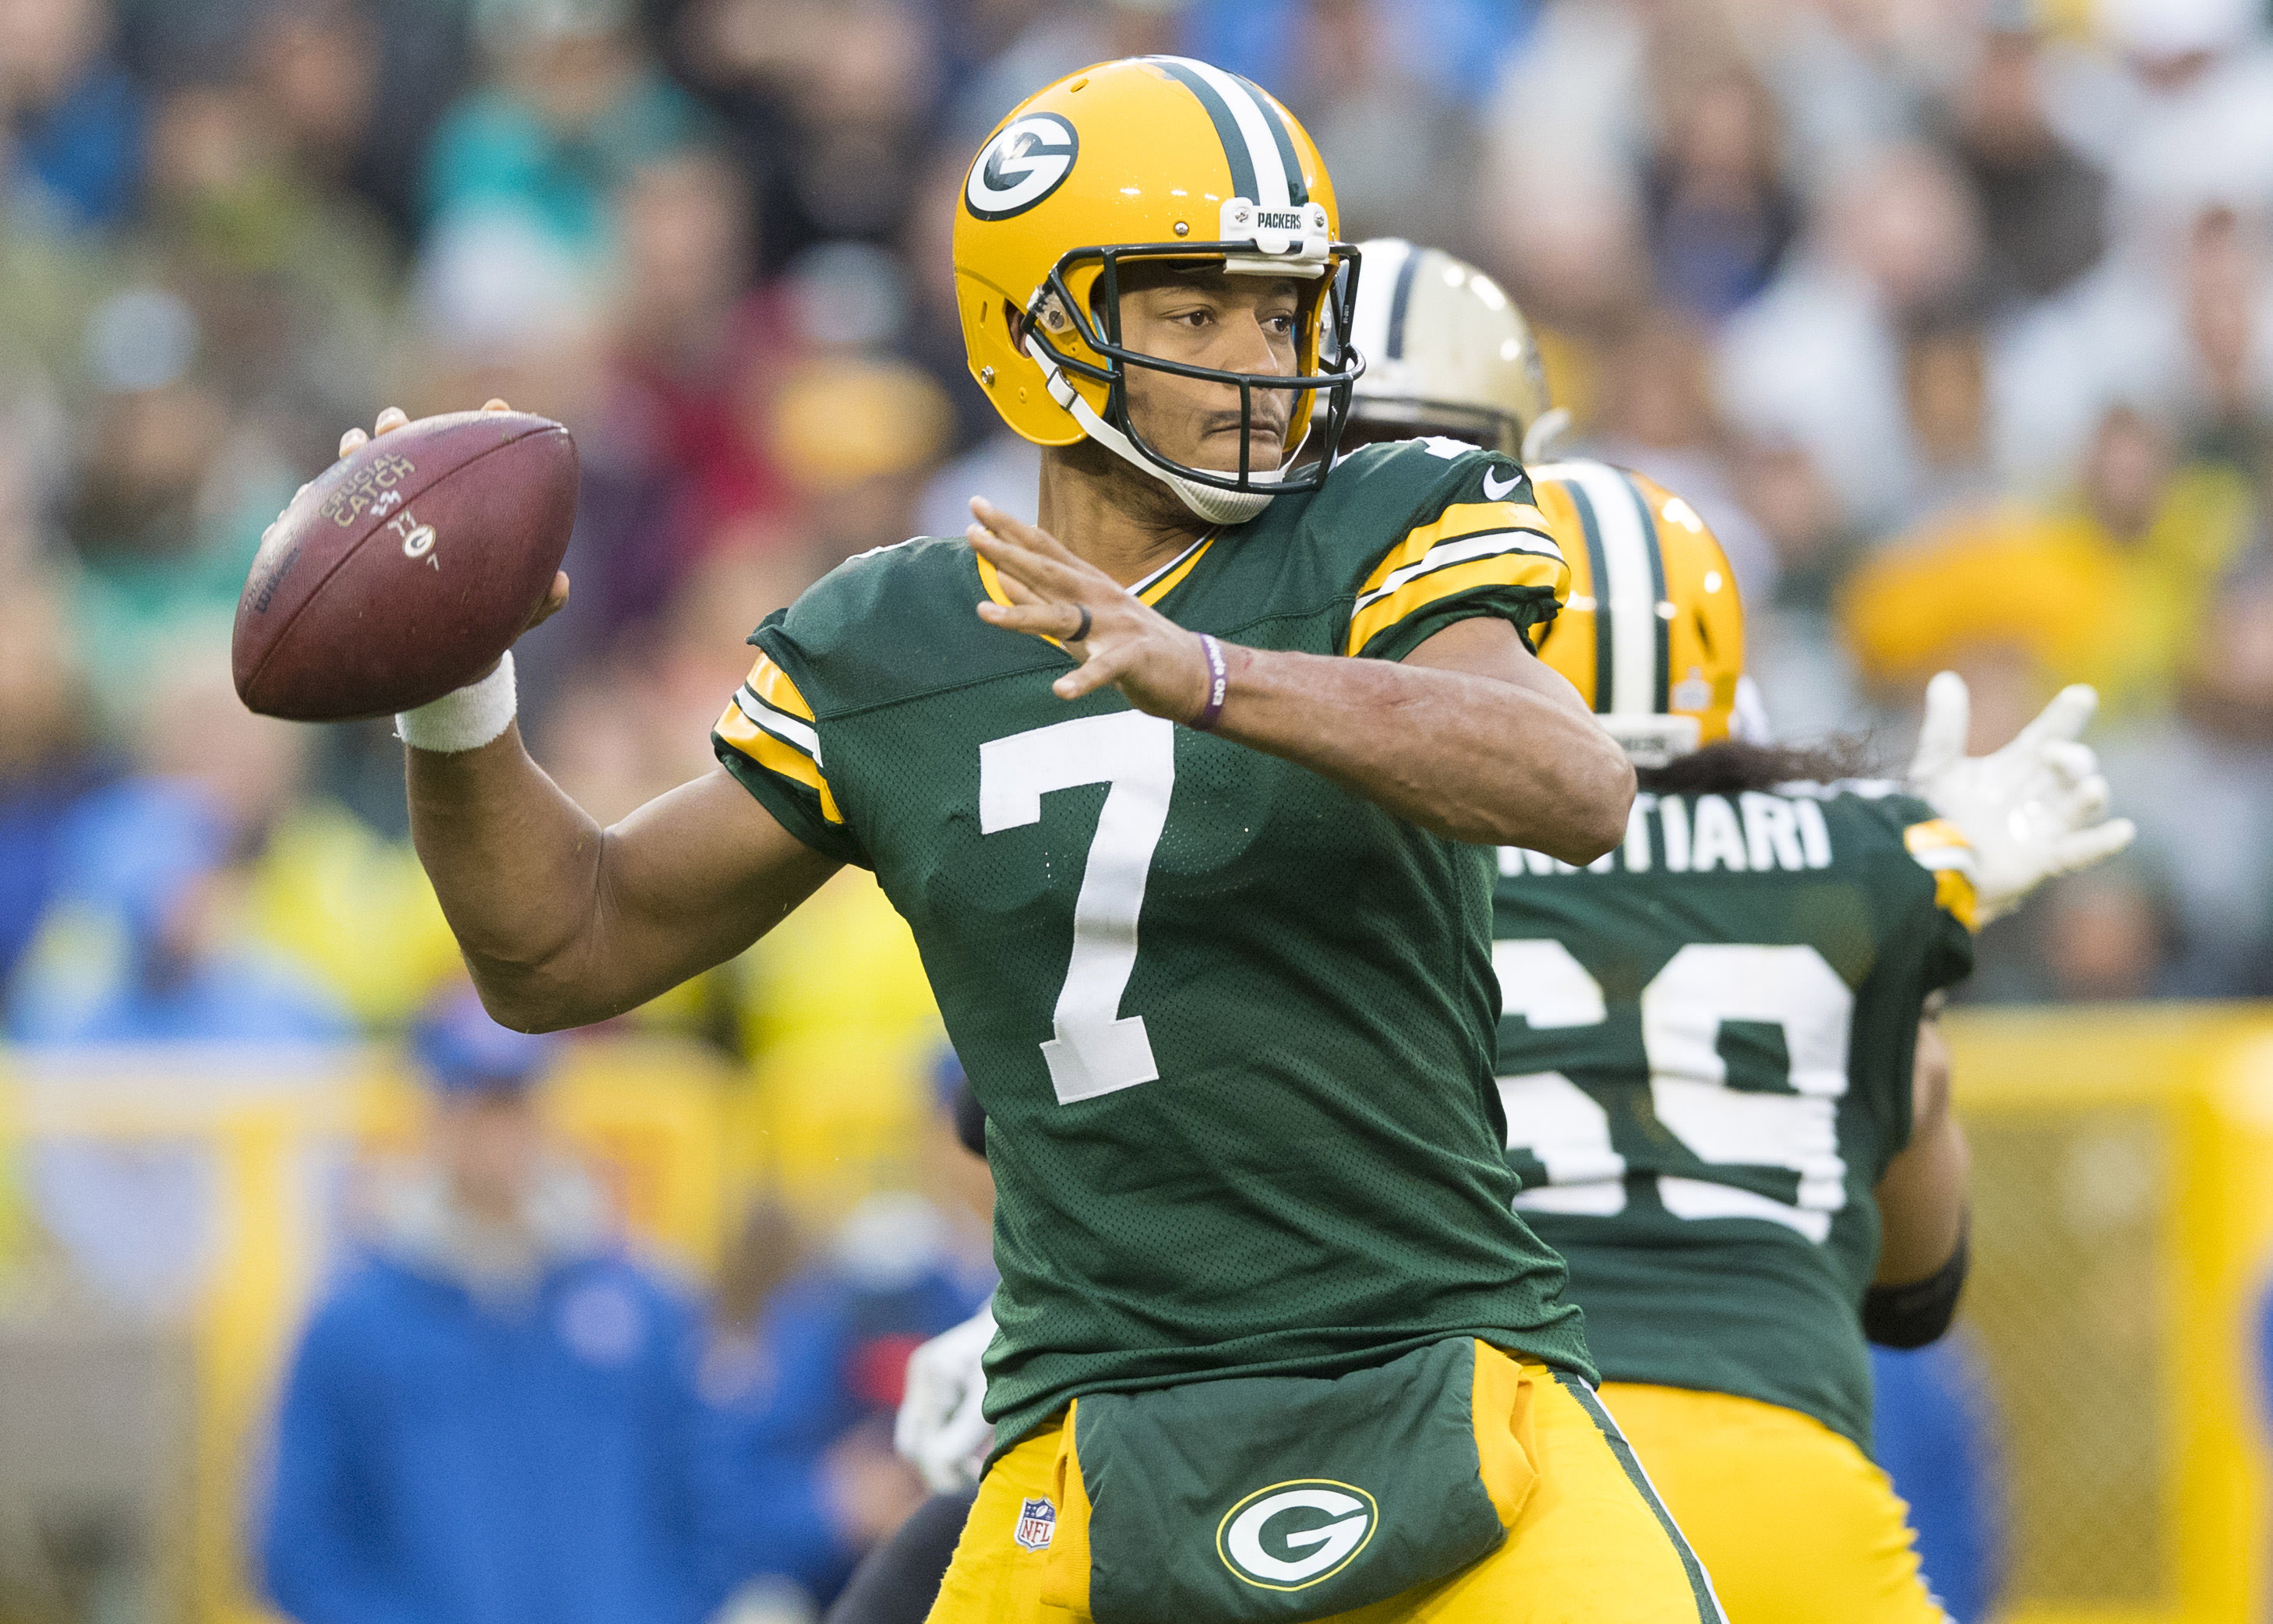 NFL: New Orleans Saints at Green Bay Packers